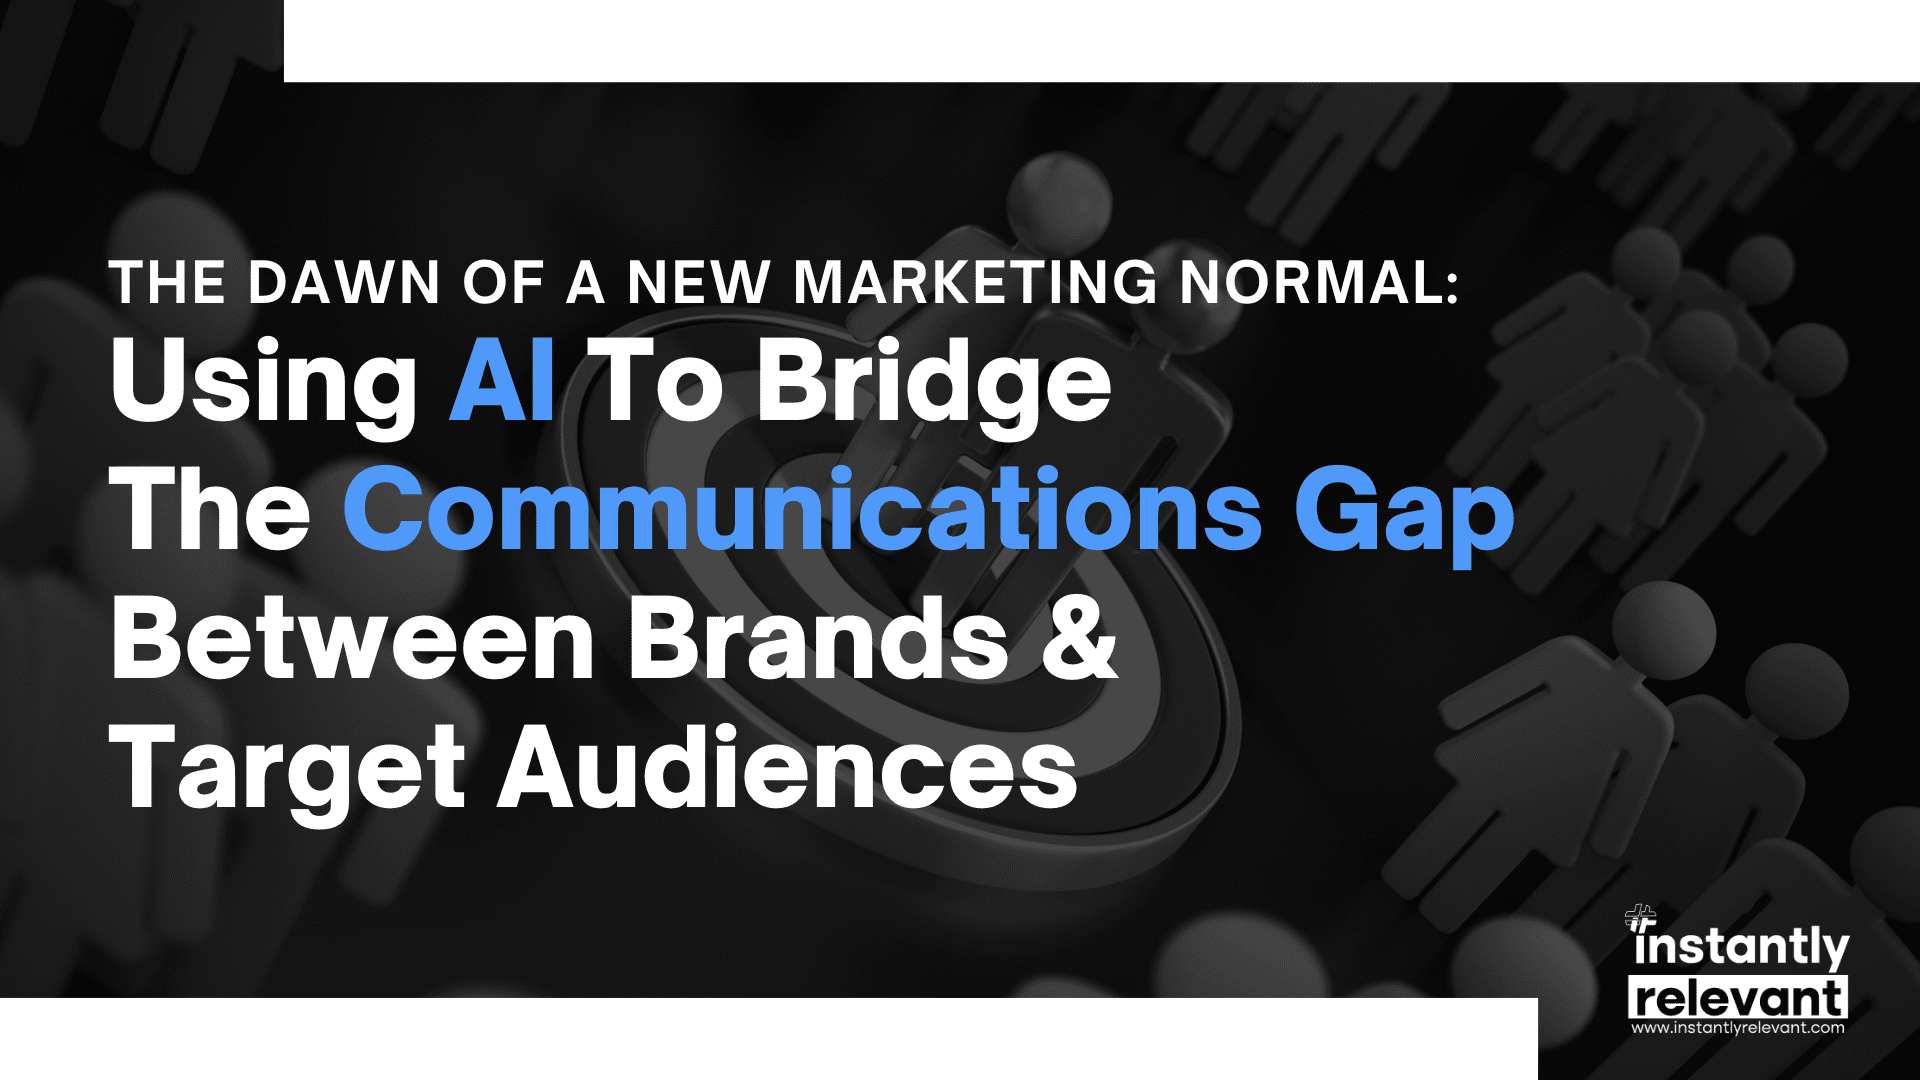 The Dawn Of A New Marketing Normal: Using AI To Bridge The Communications Gap Between Brands & Target Audiences